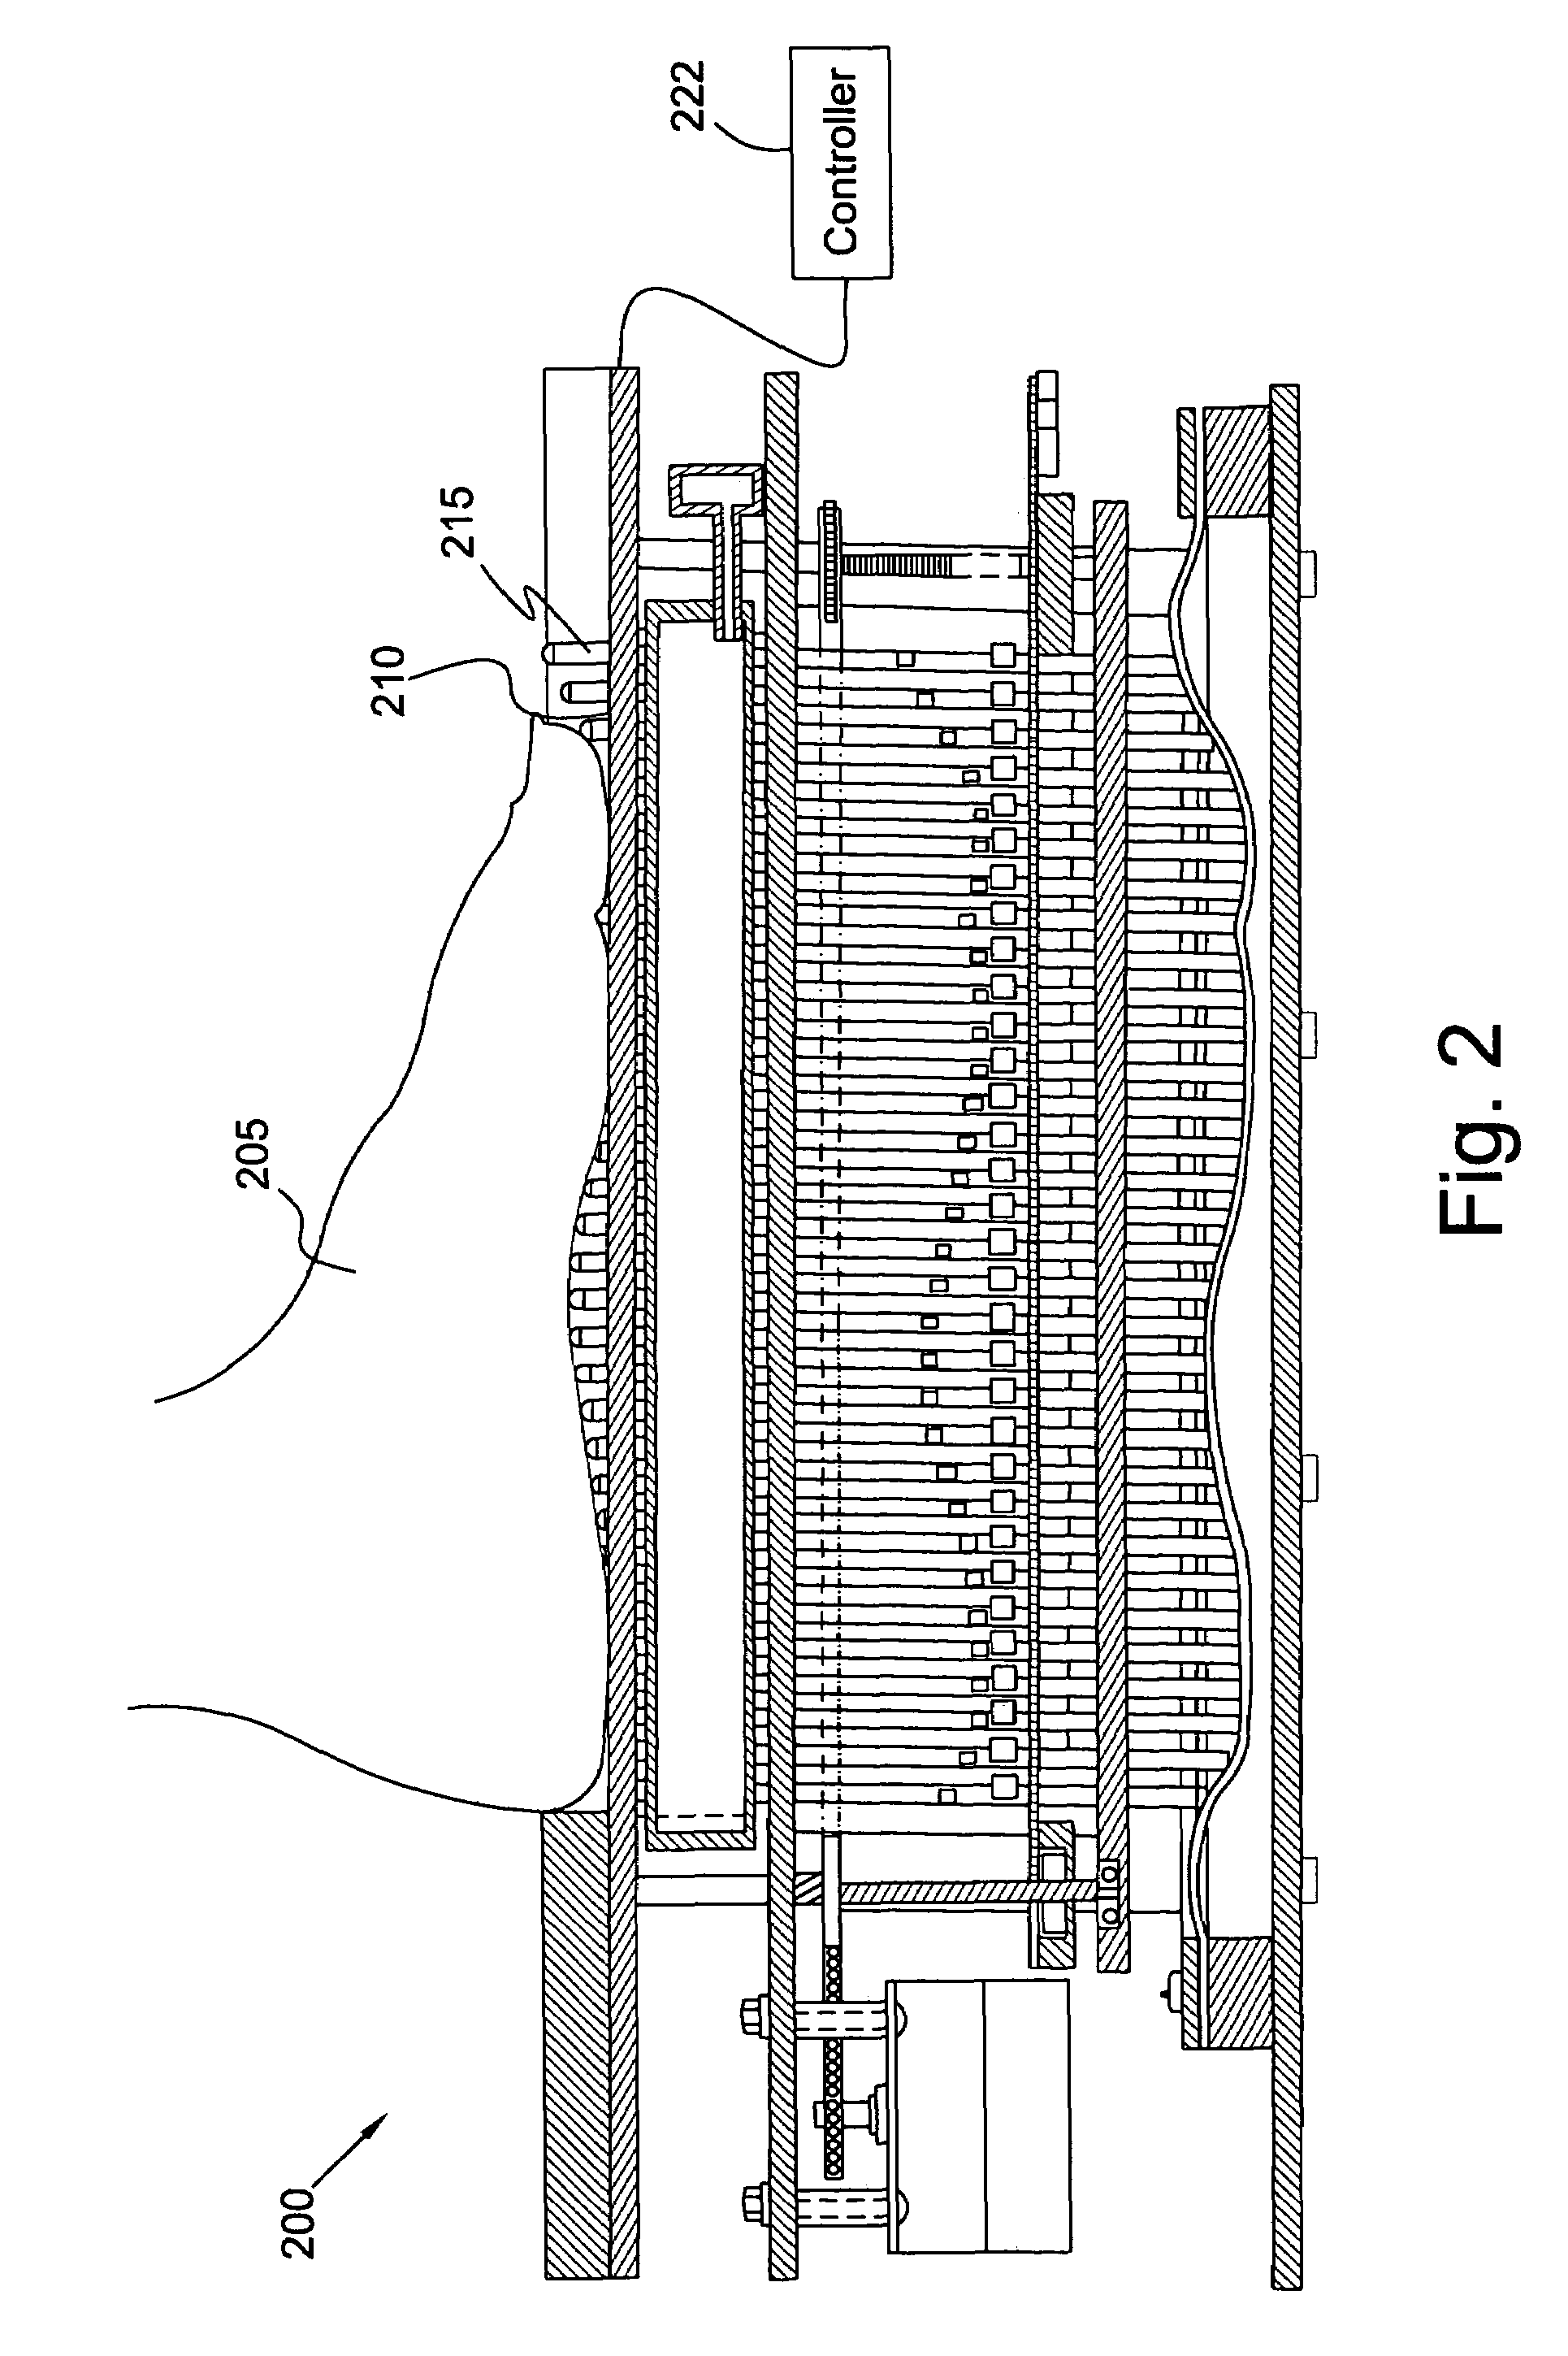 Method for determining relative mobility or regions of an object